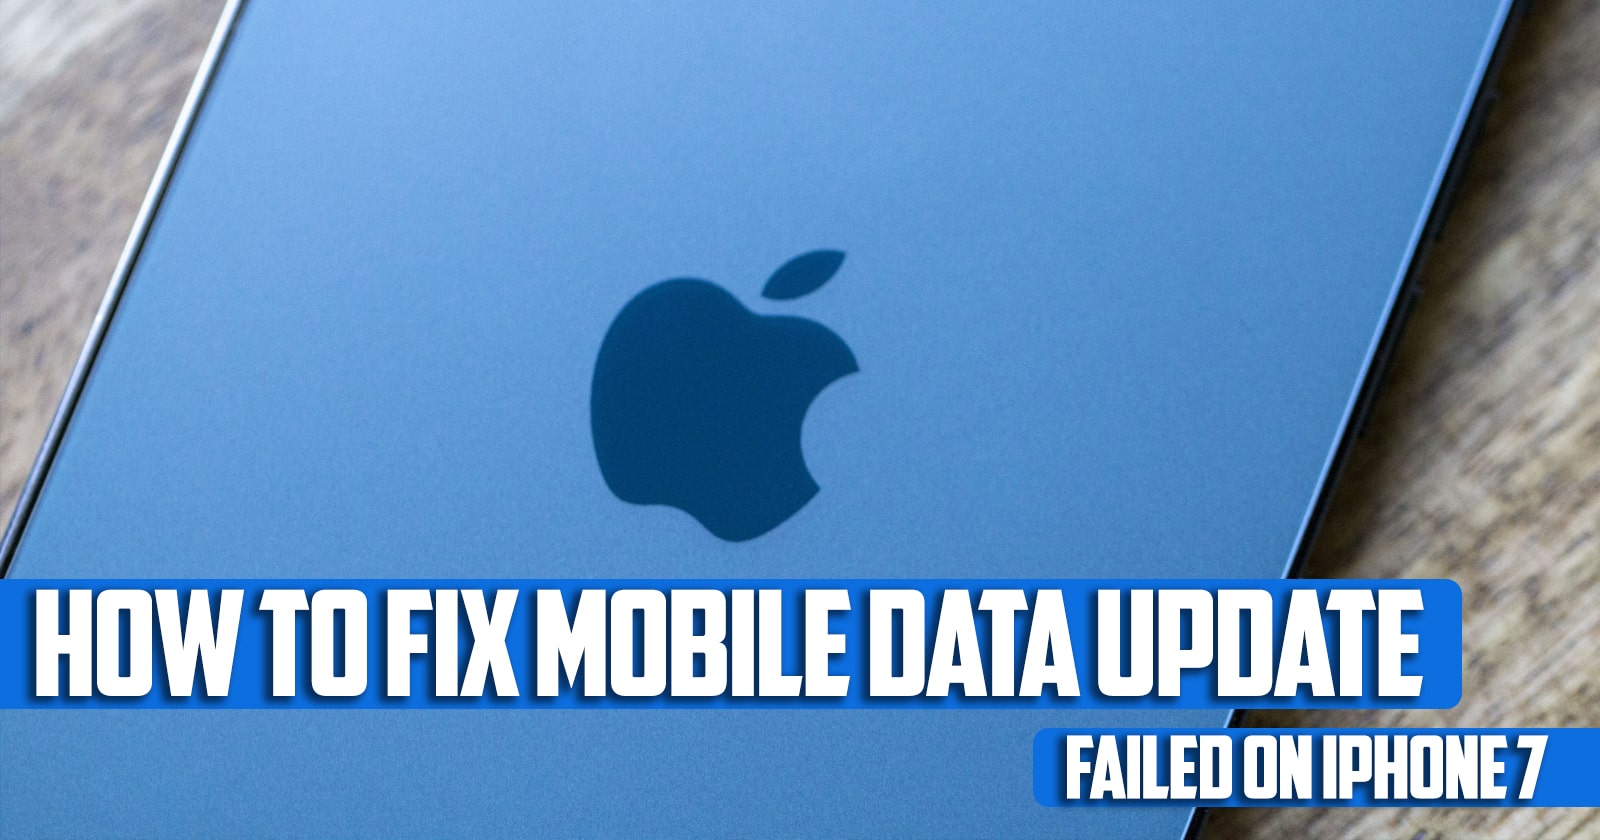 How to Fix Mobile Data Update Failed on iPhone 7